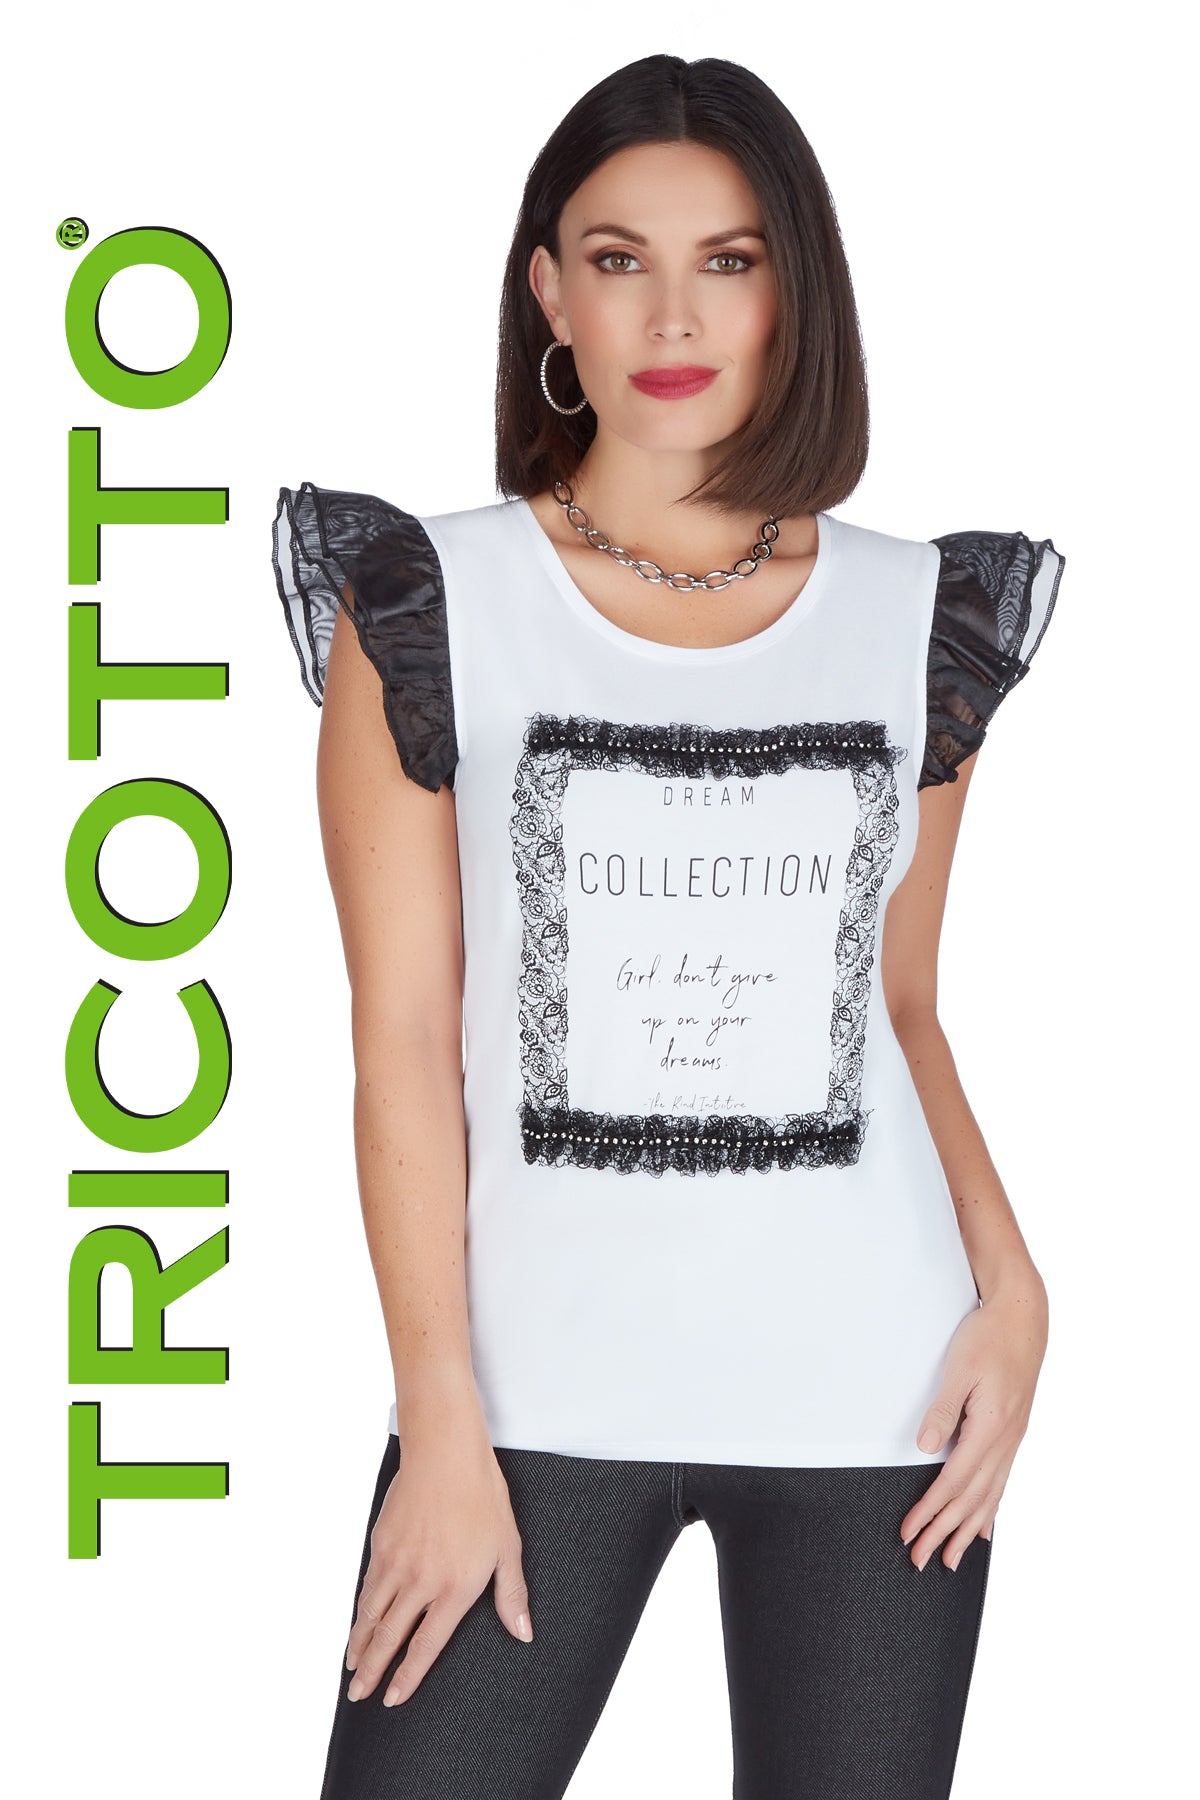 Tricotto Spring 2022-Tricotto Clothing-Tricotto T-shirts-Tricotto Jeans-Jane & John Fashion-Tricotto Online Shop-Tricotto Fashion Quebec-Tricotto Clothing Online